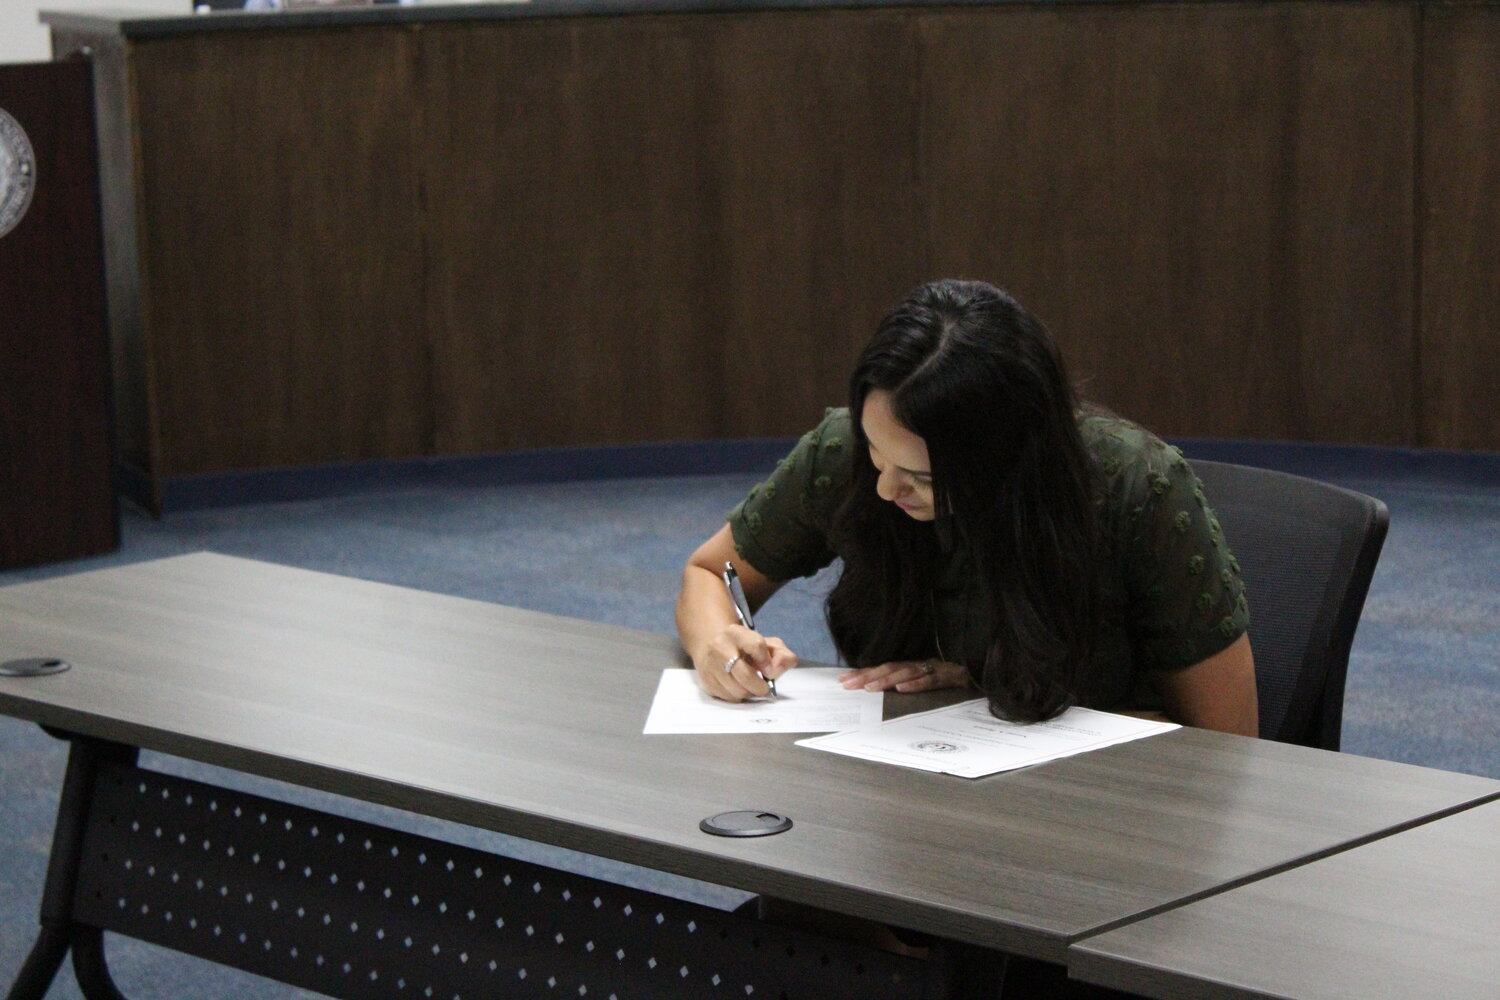 New elected school board member Naomi Brown signs her official document as the representative of District 7